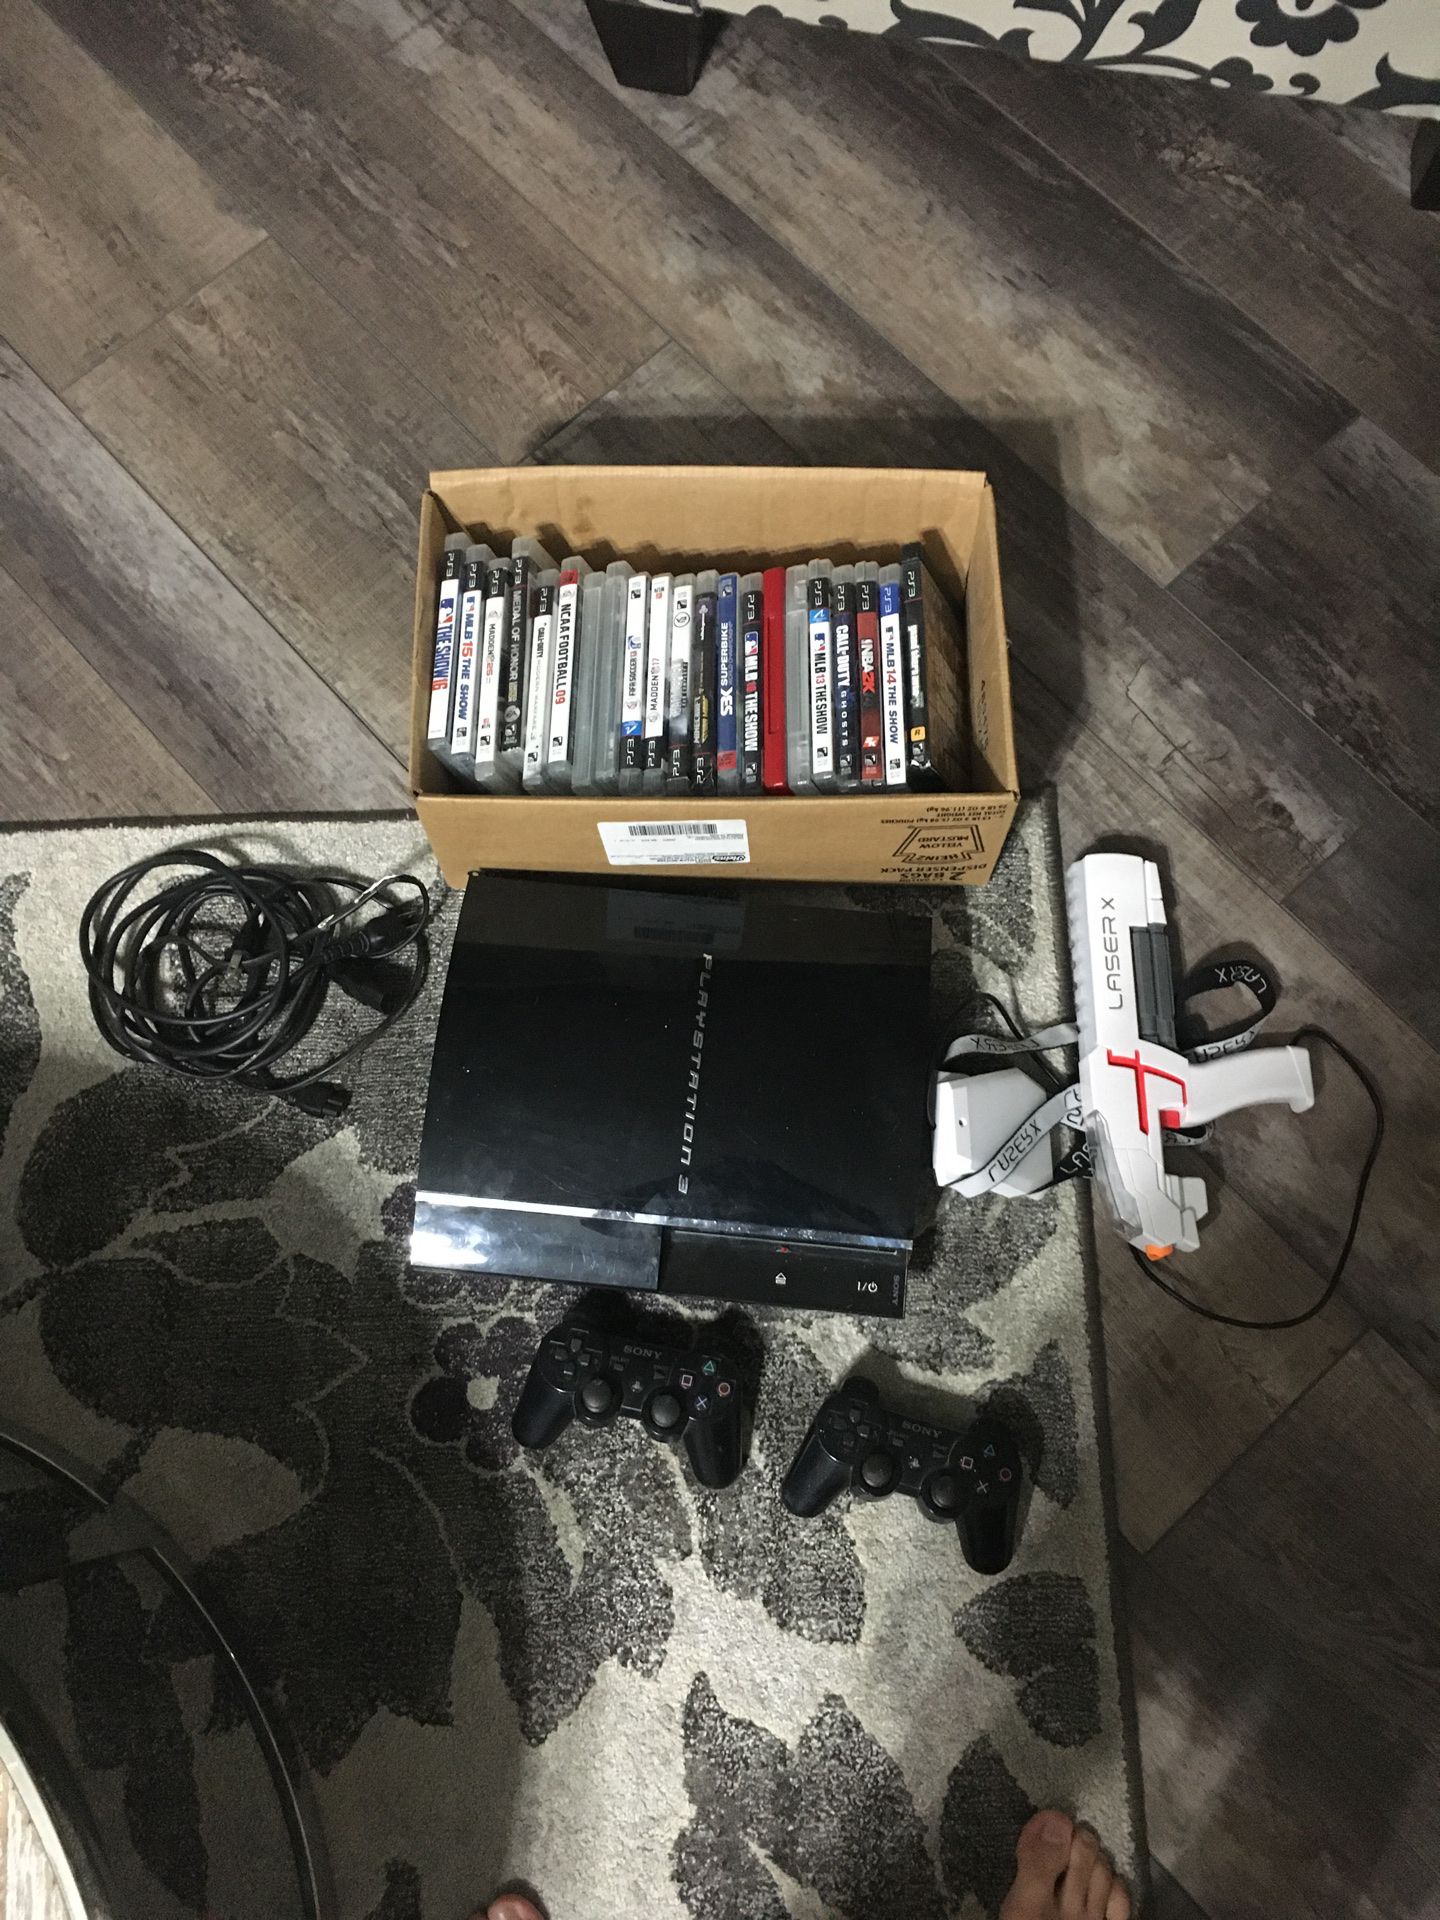 Ps3 w/ 2 controllers, laser x gun, cables, and 20 games‼️‼️🕹